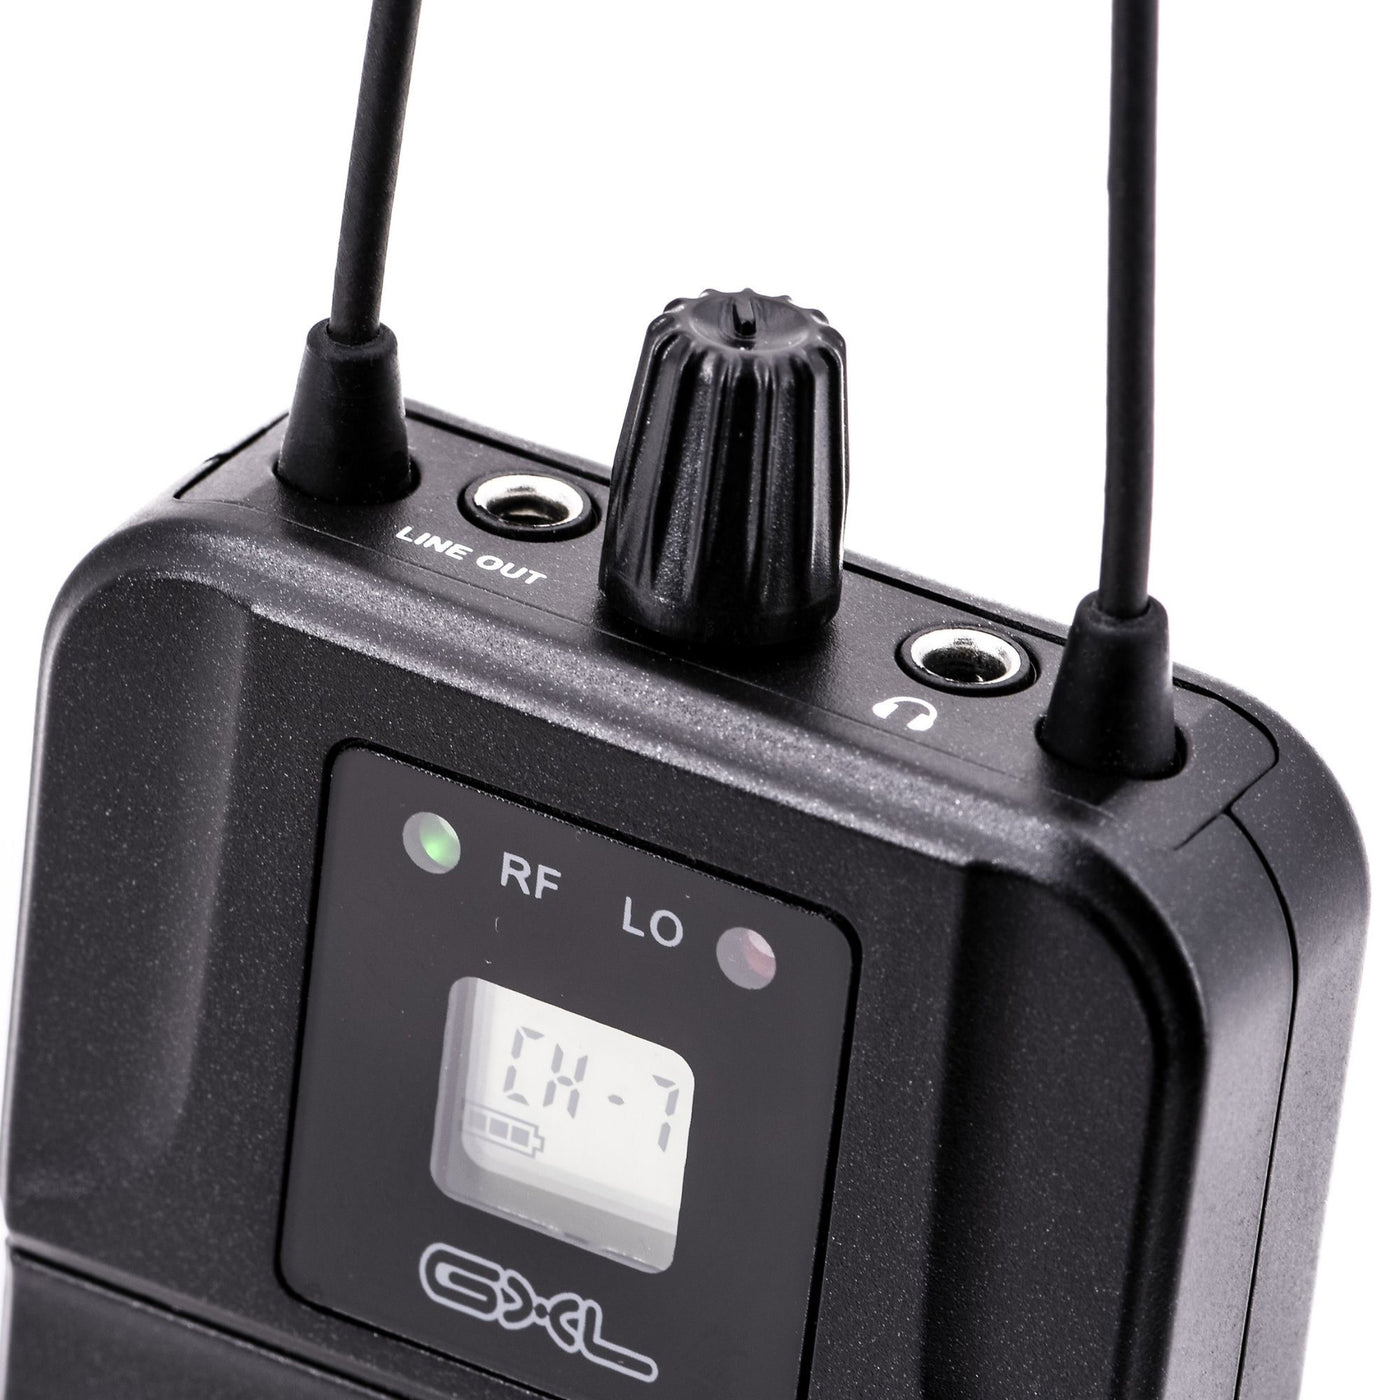 CAD Audio GXLIEMBP Bodypack Receiver with MEB1 Earbuds (GXLIEMBP)